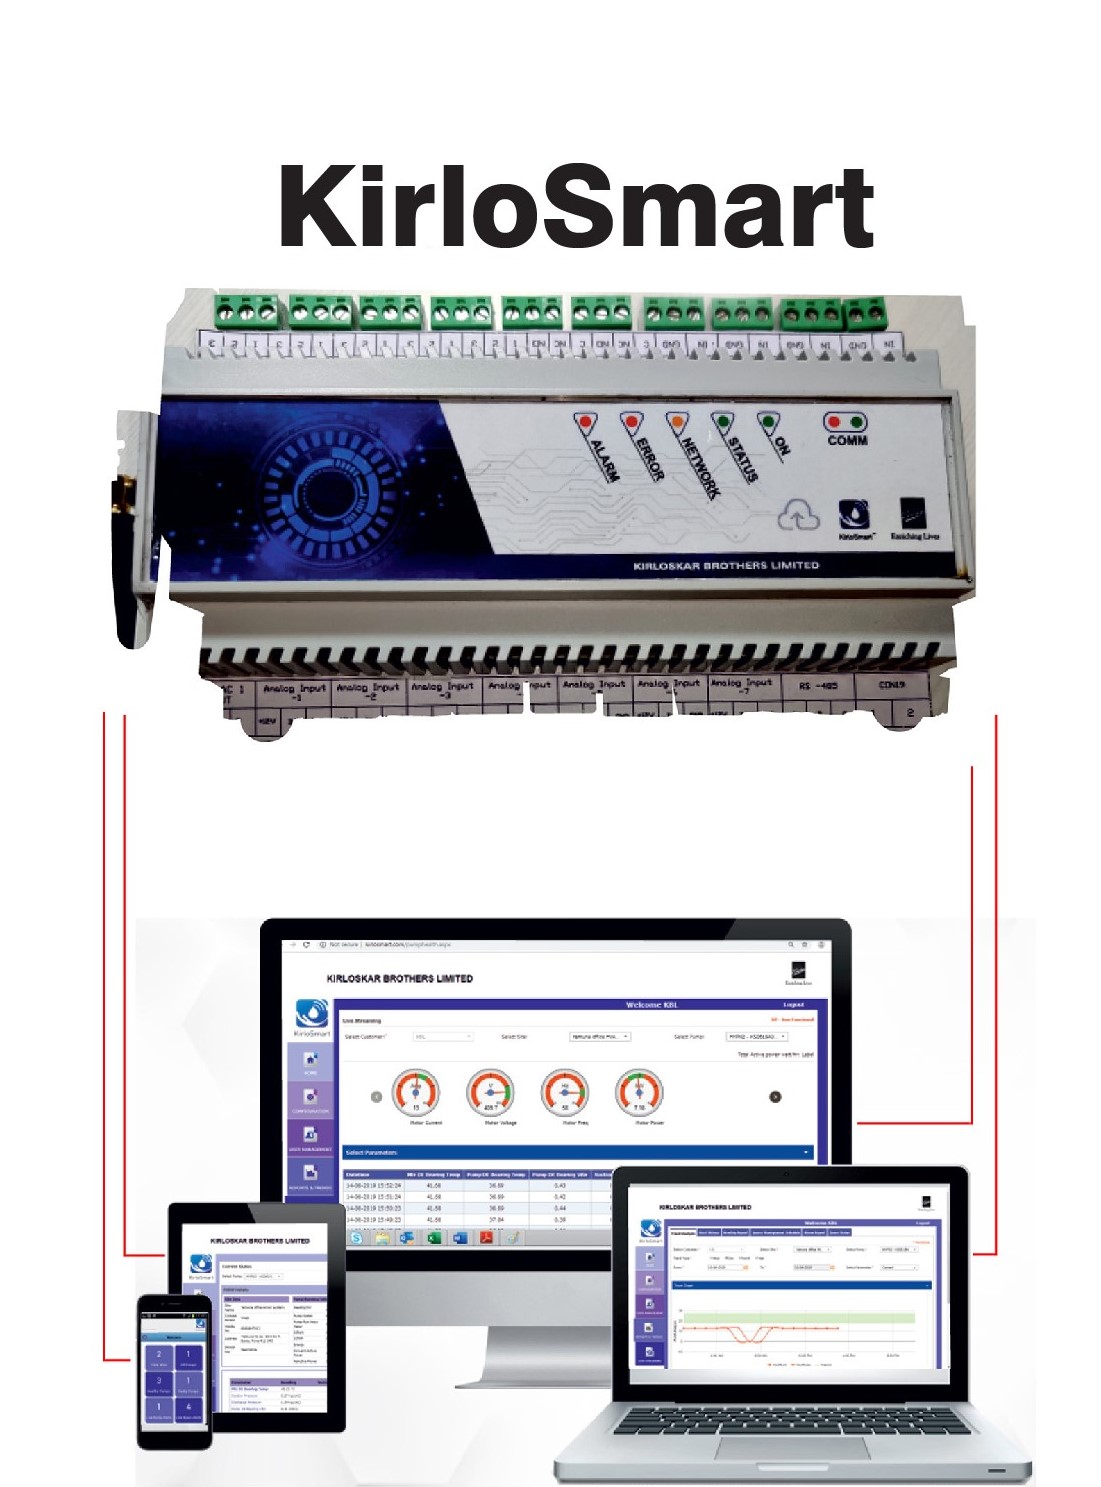 KirloSmart has proved to be a vital technology during the Covid-19 lockdown with government-imposed restrictions on movement.